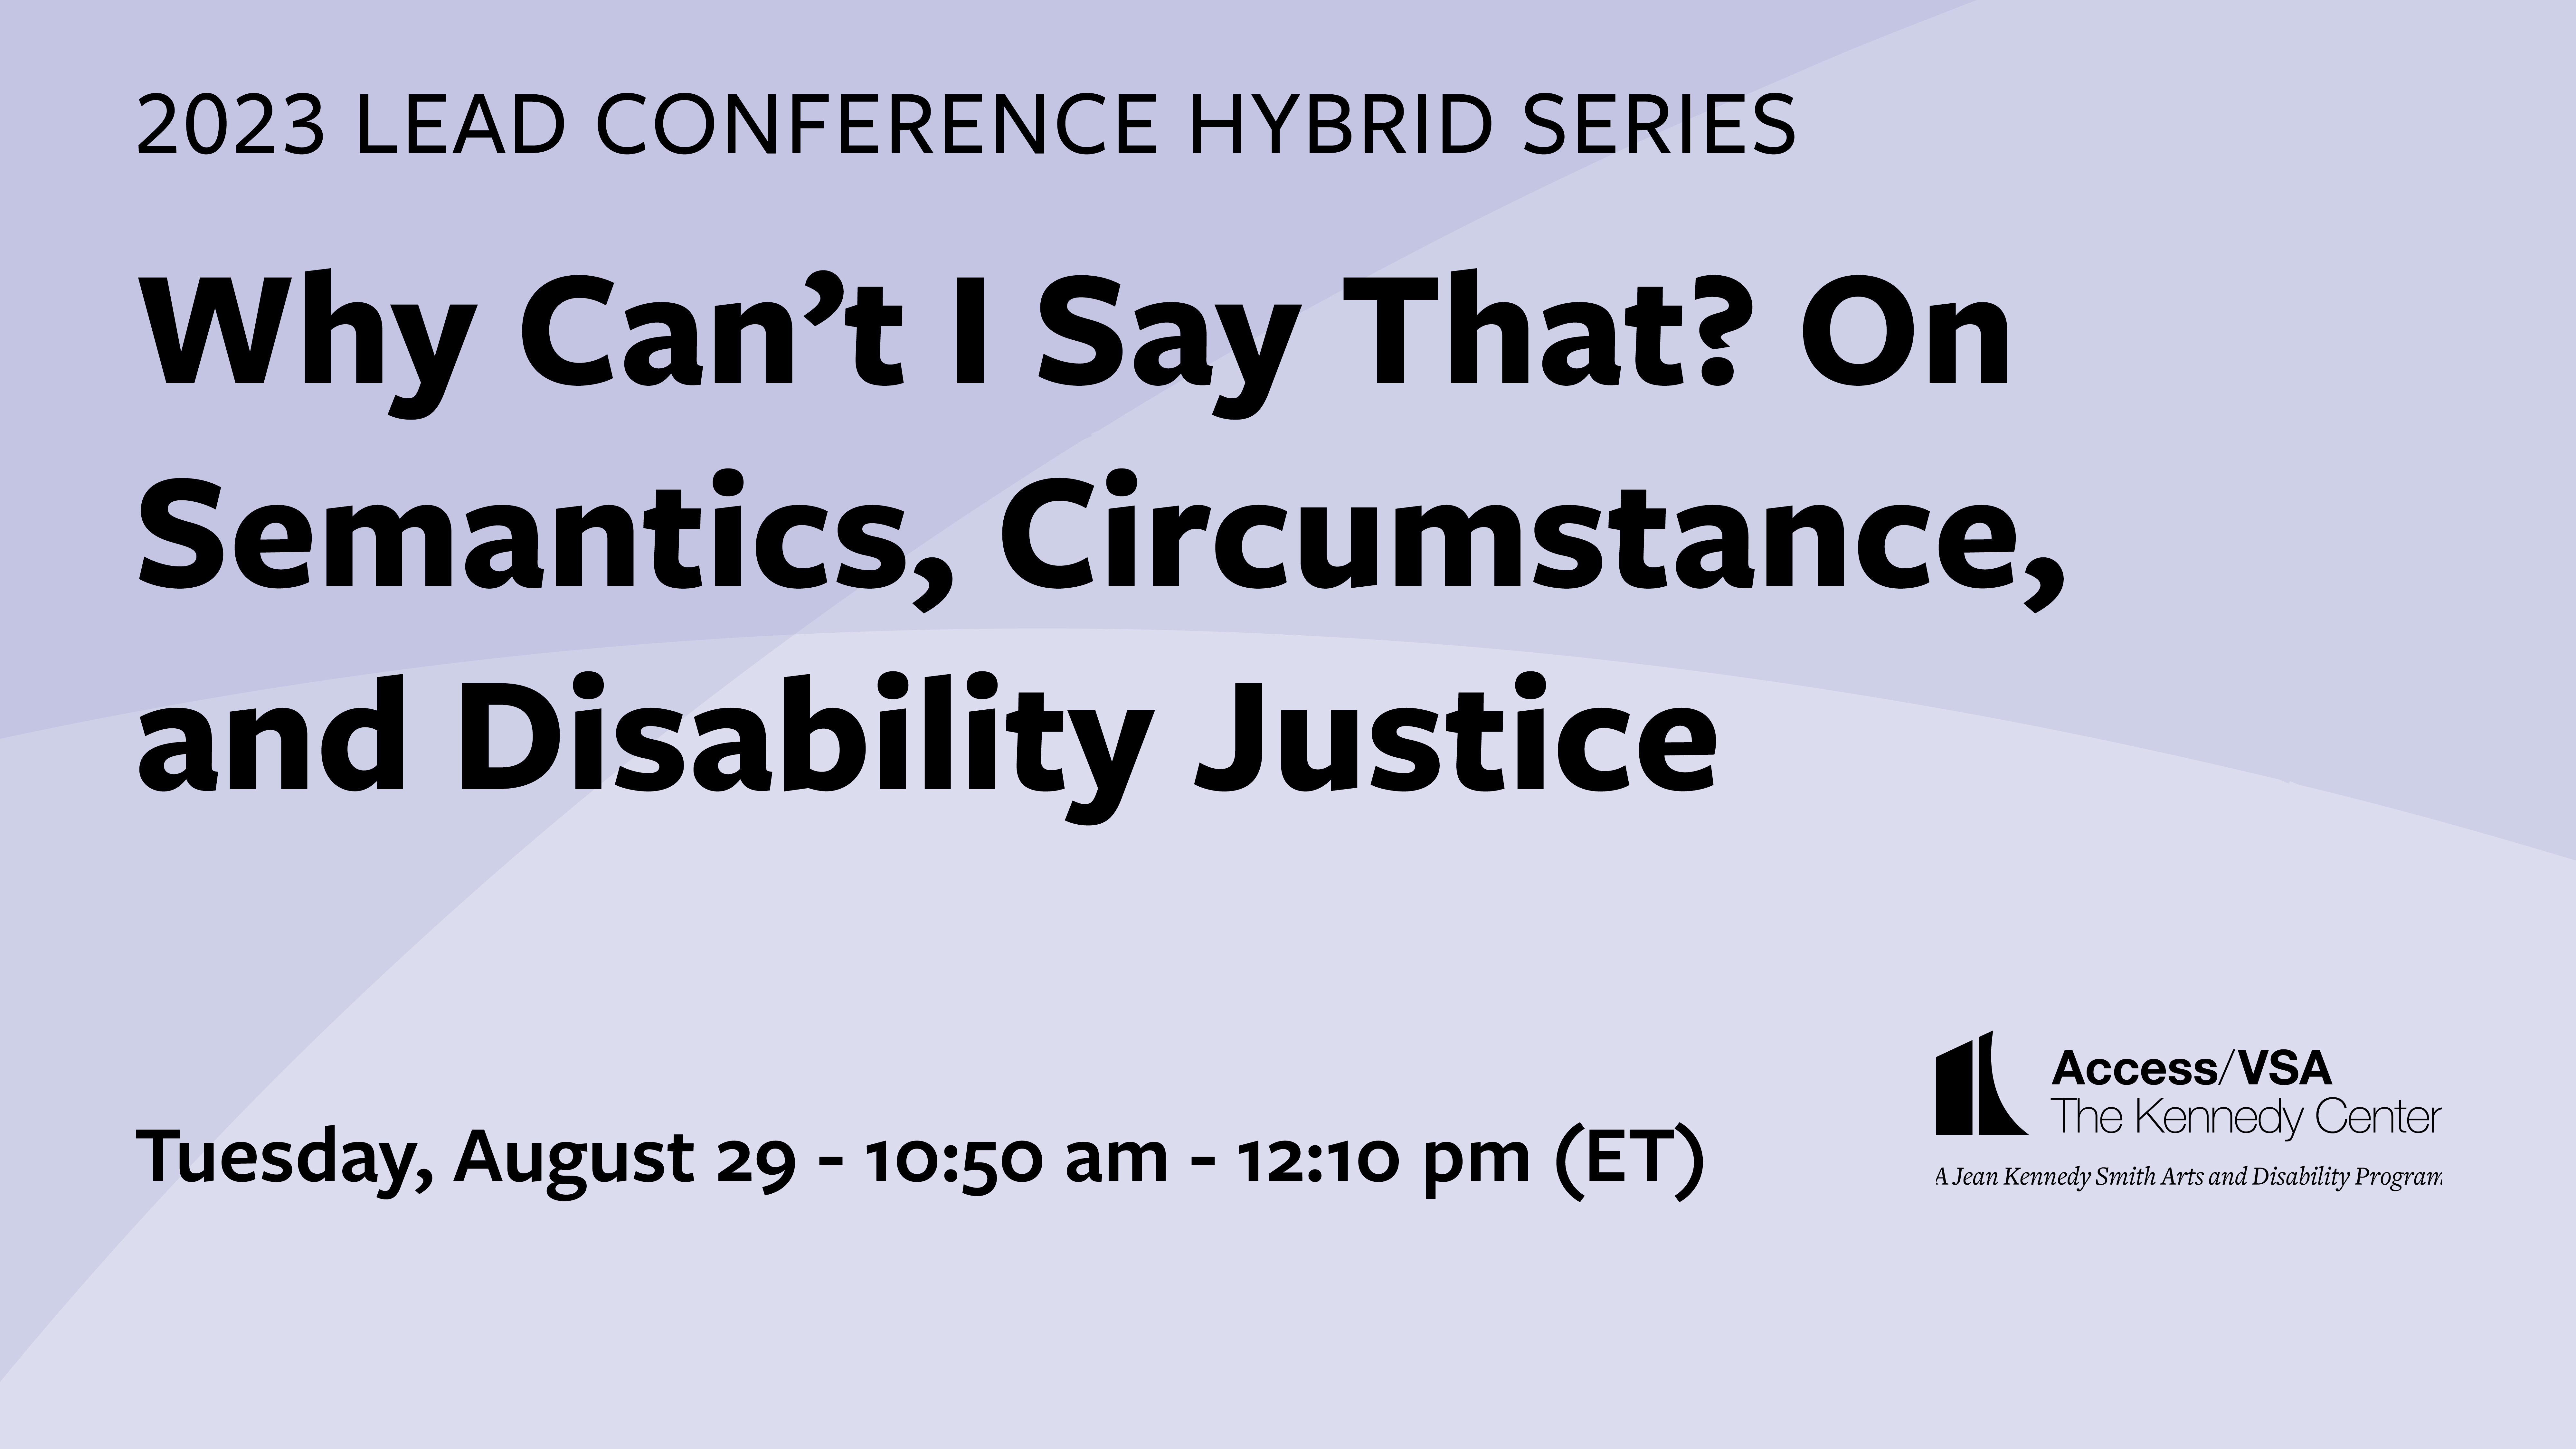 Why Can't I Say That? On Semantics, Circumstance, and Disability Justice 